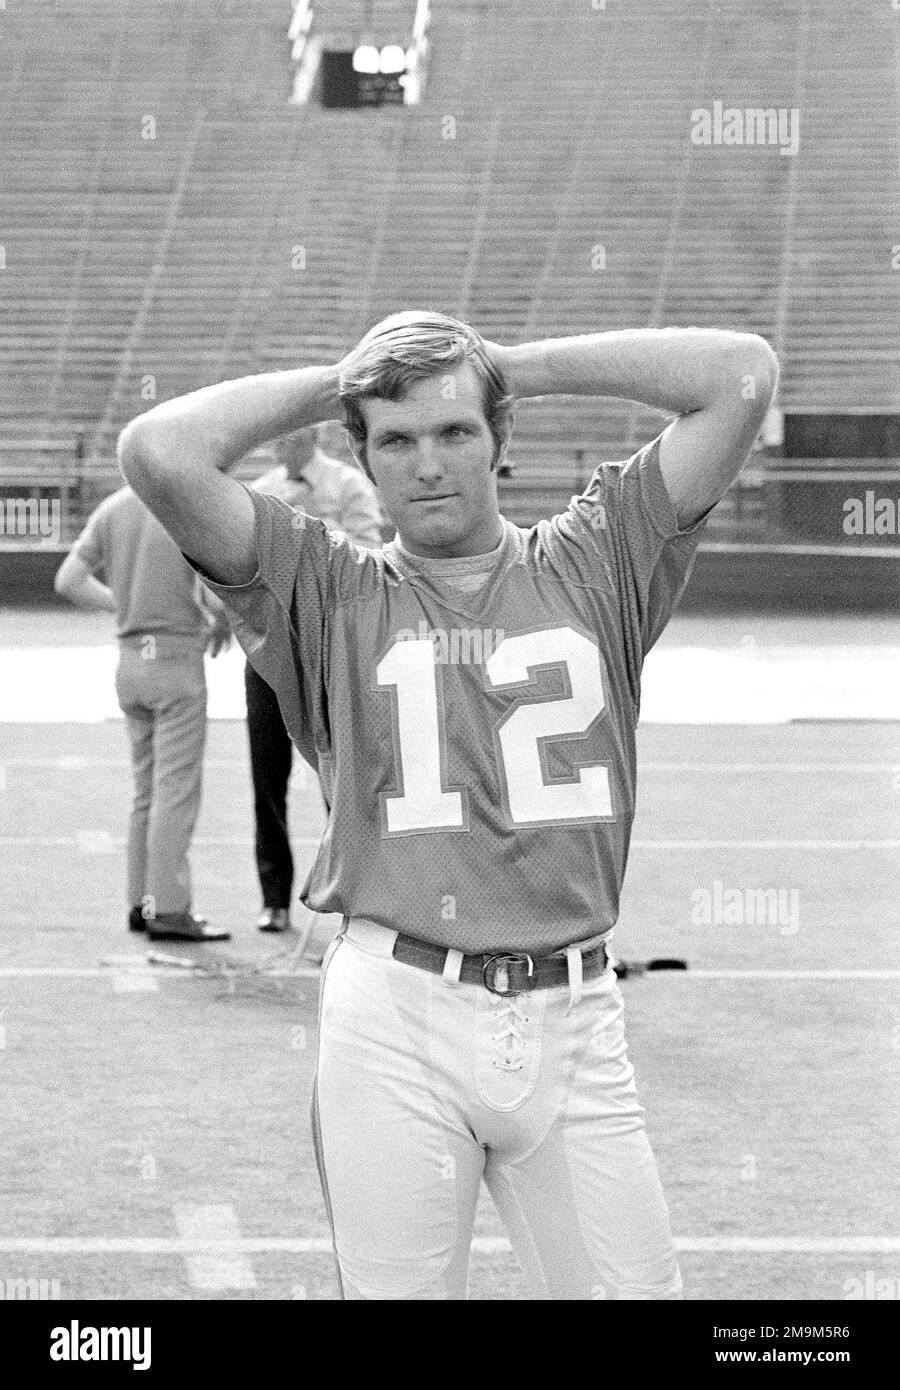 Miami Dolphins quarterback Bob Griese stretches during a practice